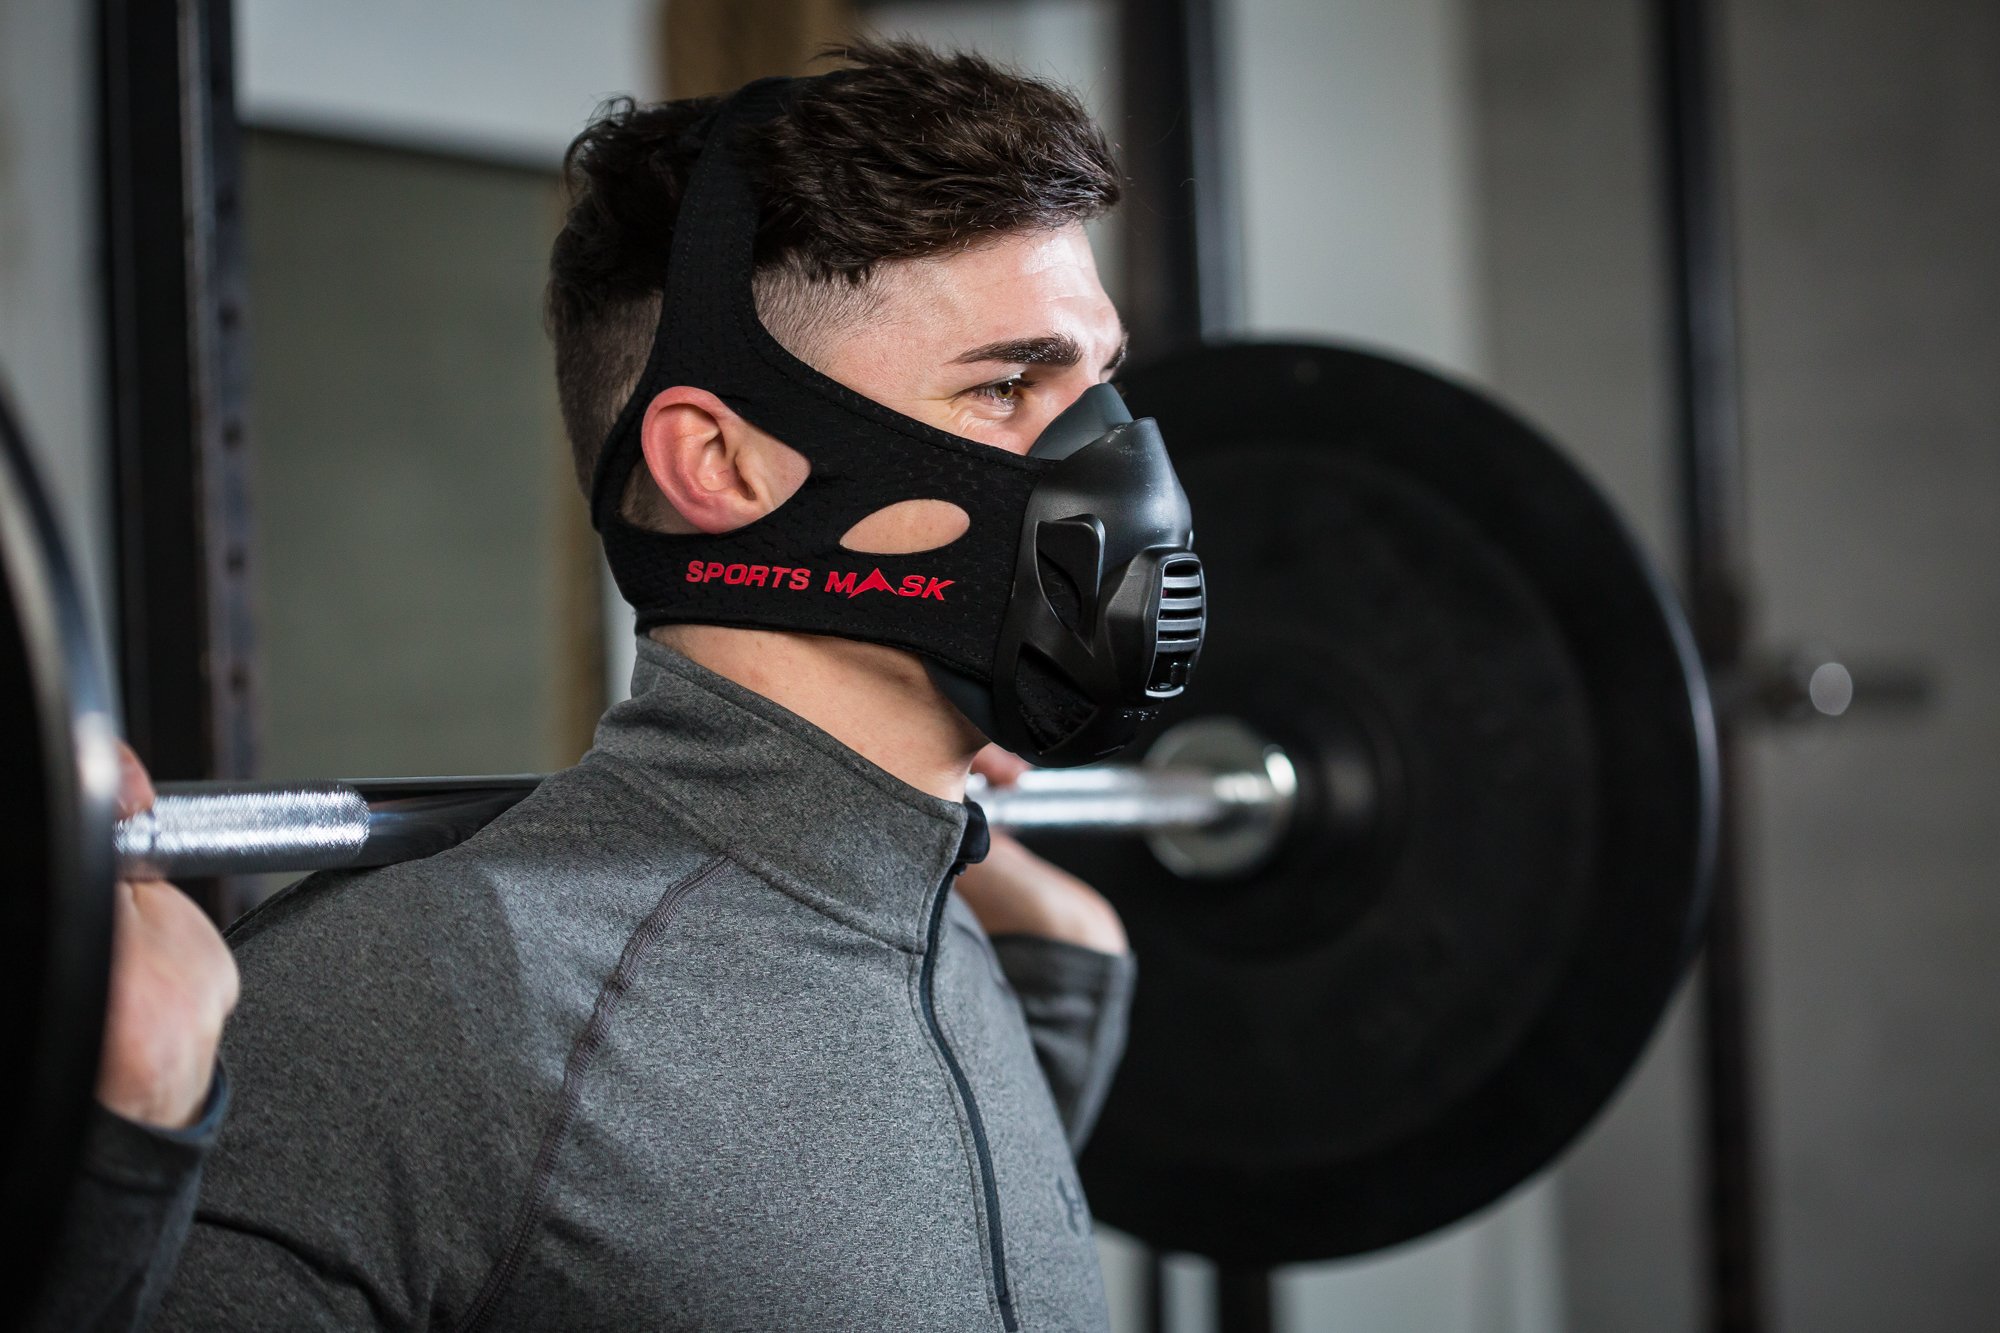 The Oxygen Advantage on Twitter: "SportsMask (created by Patrick McKeown) is designed to restrict air intake, strengthen your breathing muscles &amp; increase of oxygen to your organs and muscles. Watch